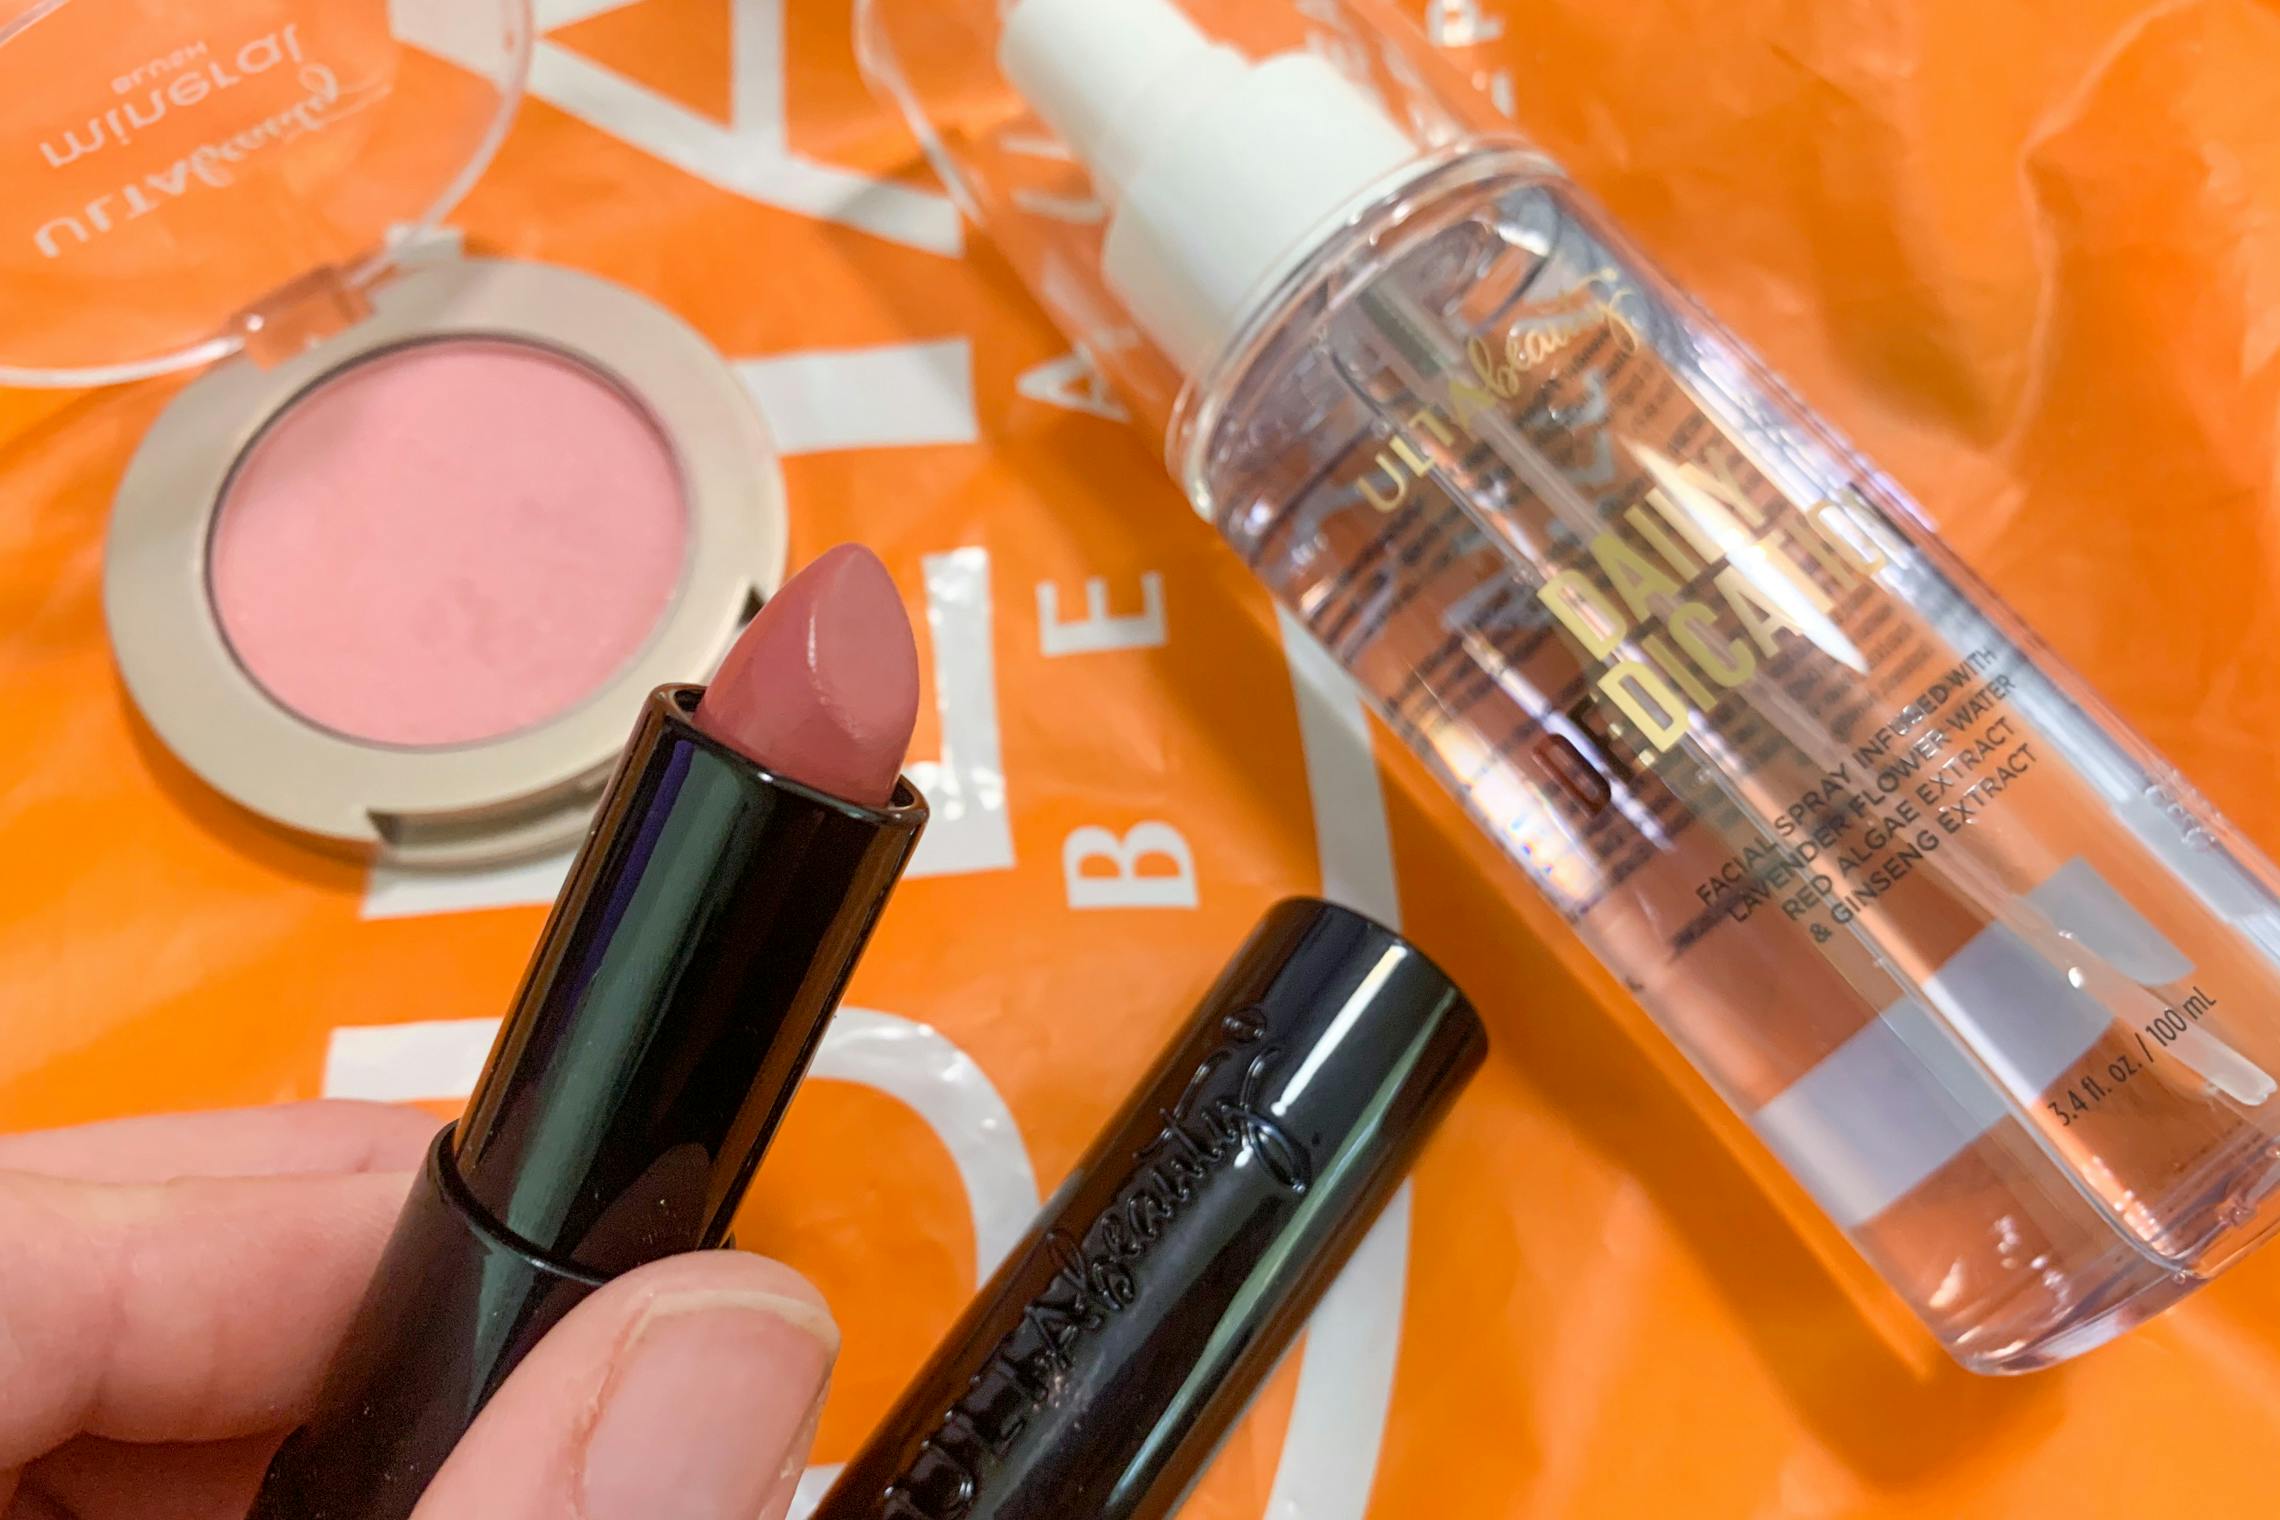 Open Ulta cosmetic products